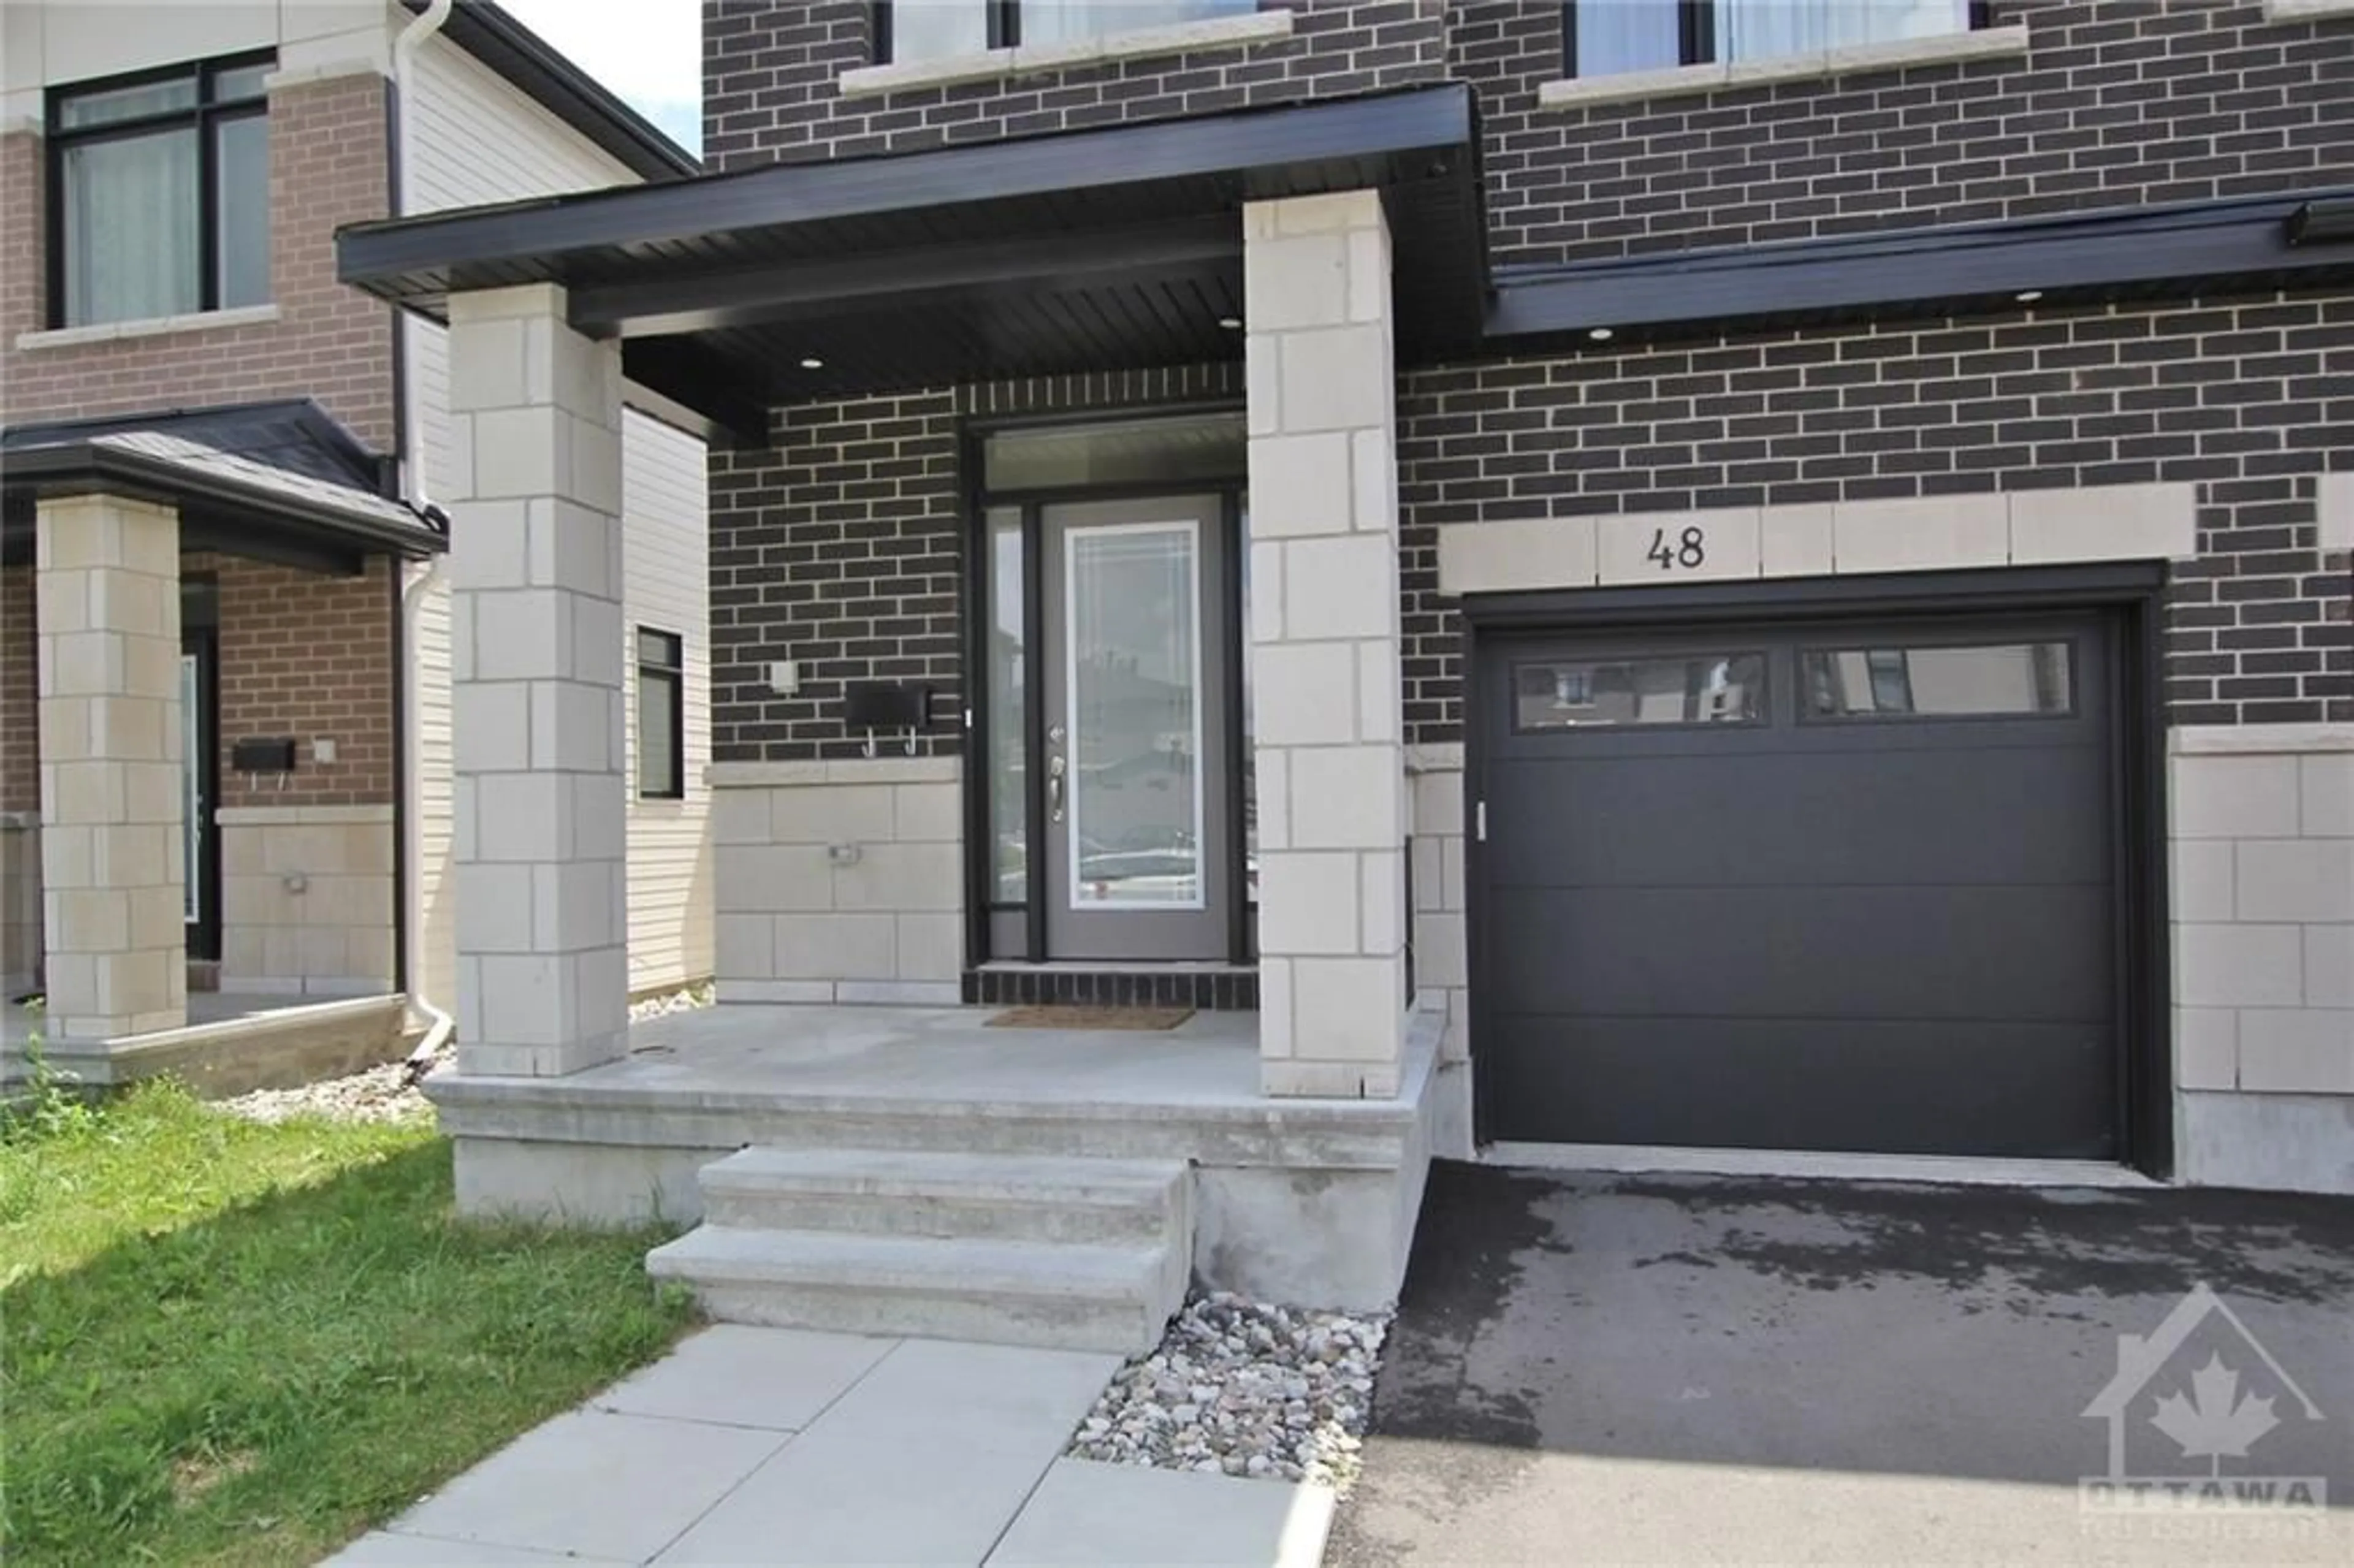 Home with brick exterior material for 48 OVERBERG Way, Ottawa Ontario K2S 2S9